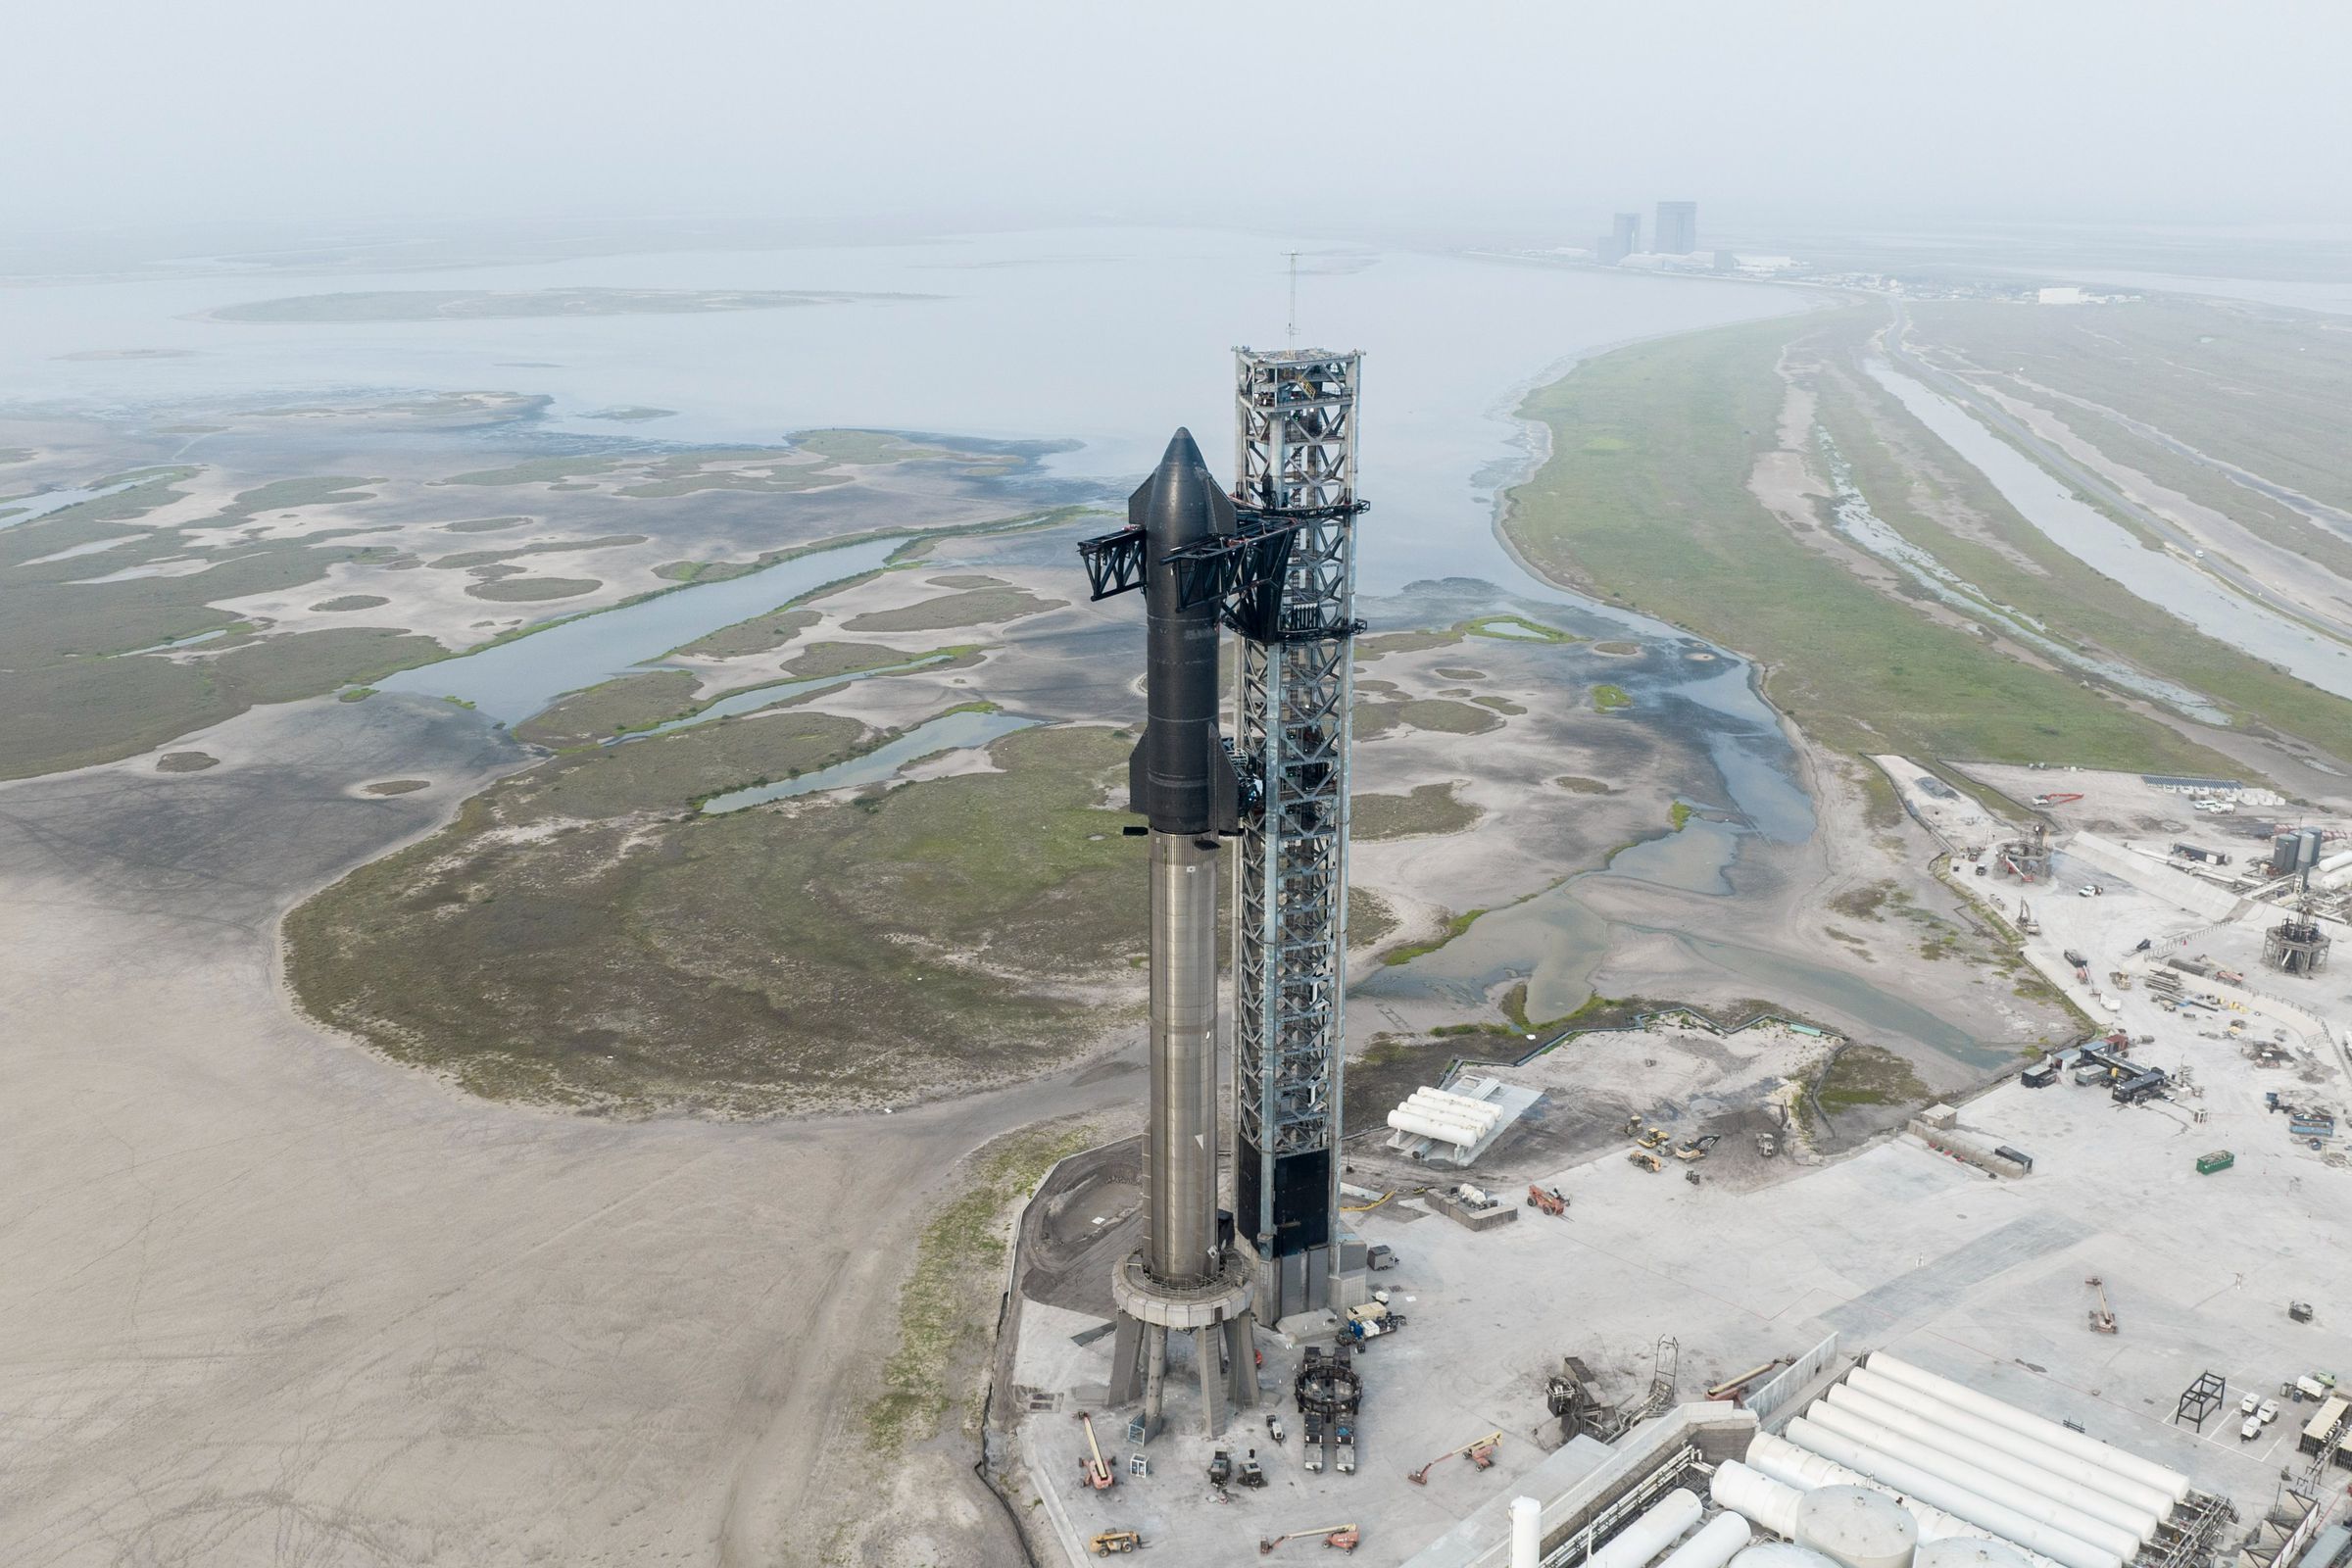 Zoomed-out landscape of SpaceX’s Starbase in Boca Chica, Texas, showing a water landscape in the back and the rocket front and center.